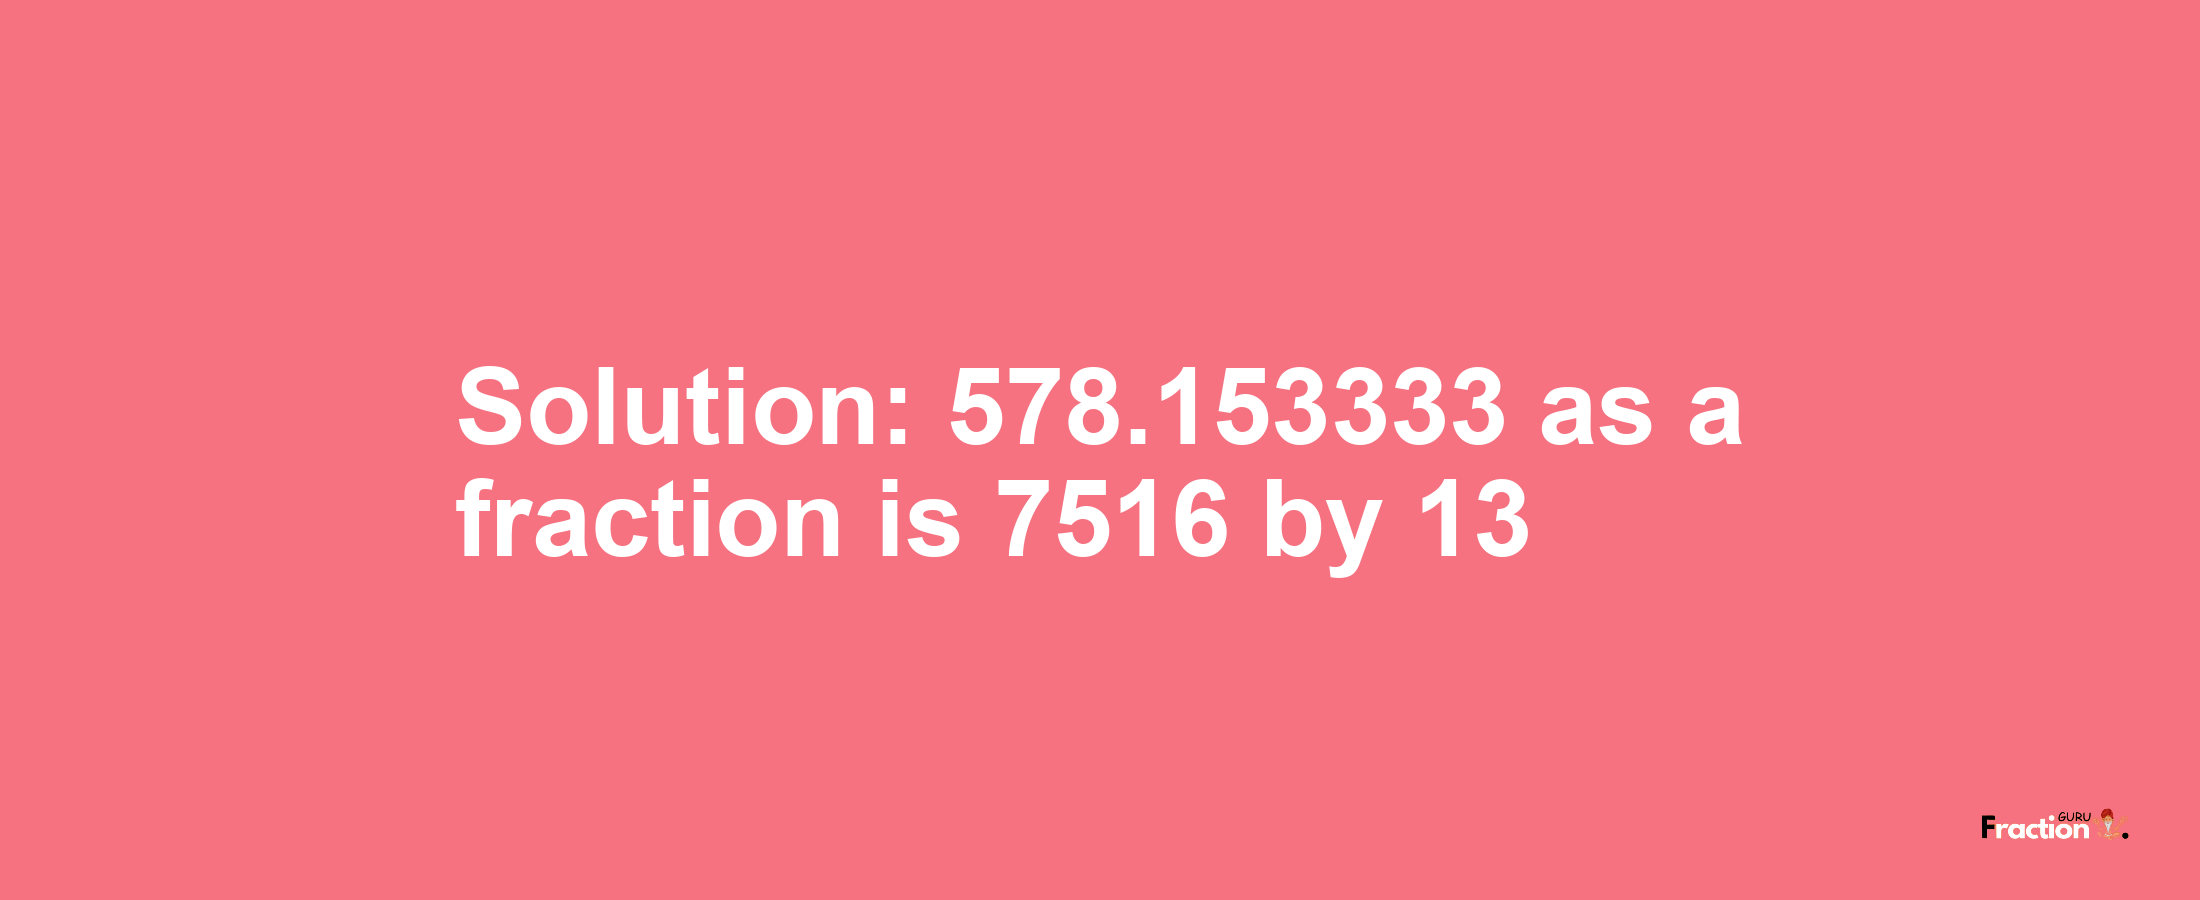 Solution:578.153333 as a fraction is 7516/13